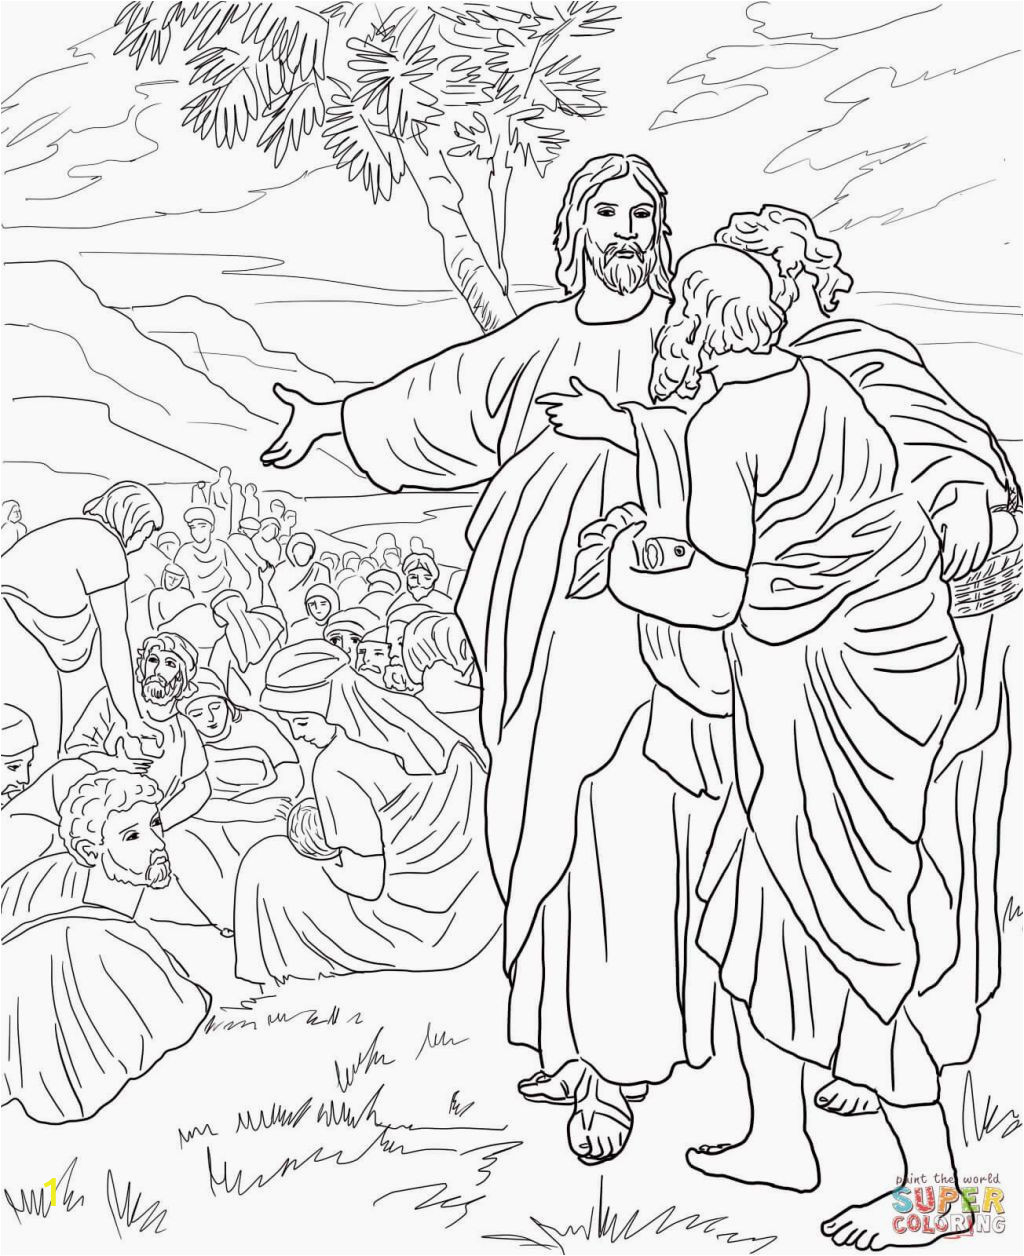 Coloring Page Of Jesus Feeding the 5000 Jesus Feeds the 5000 Coloring Page